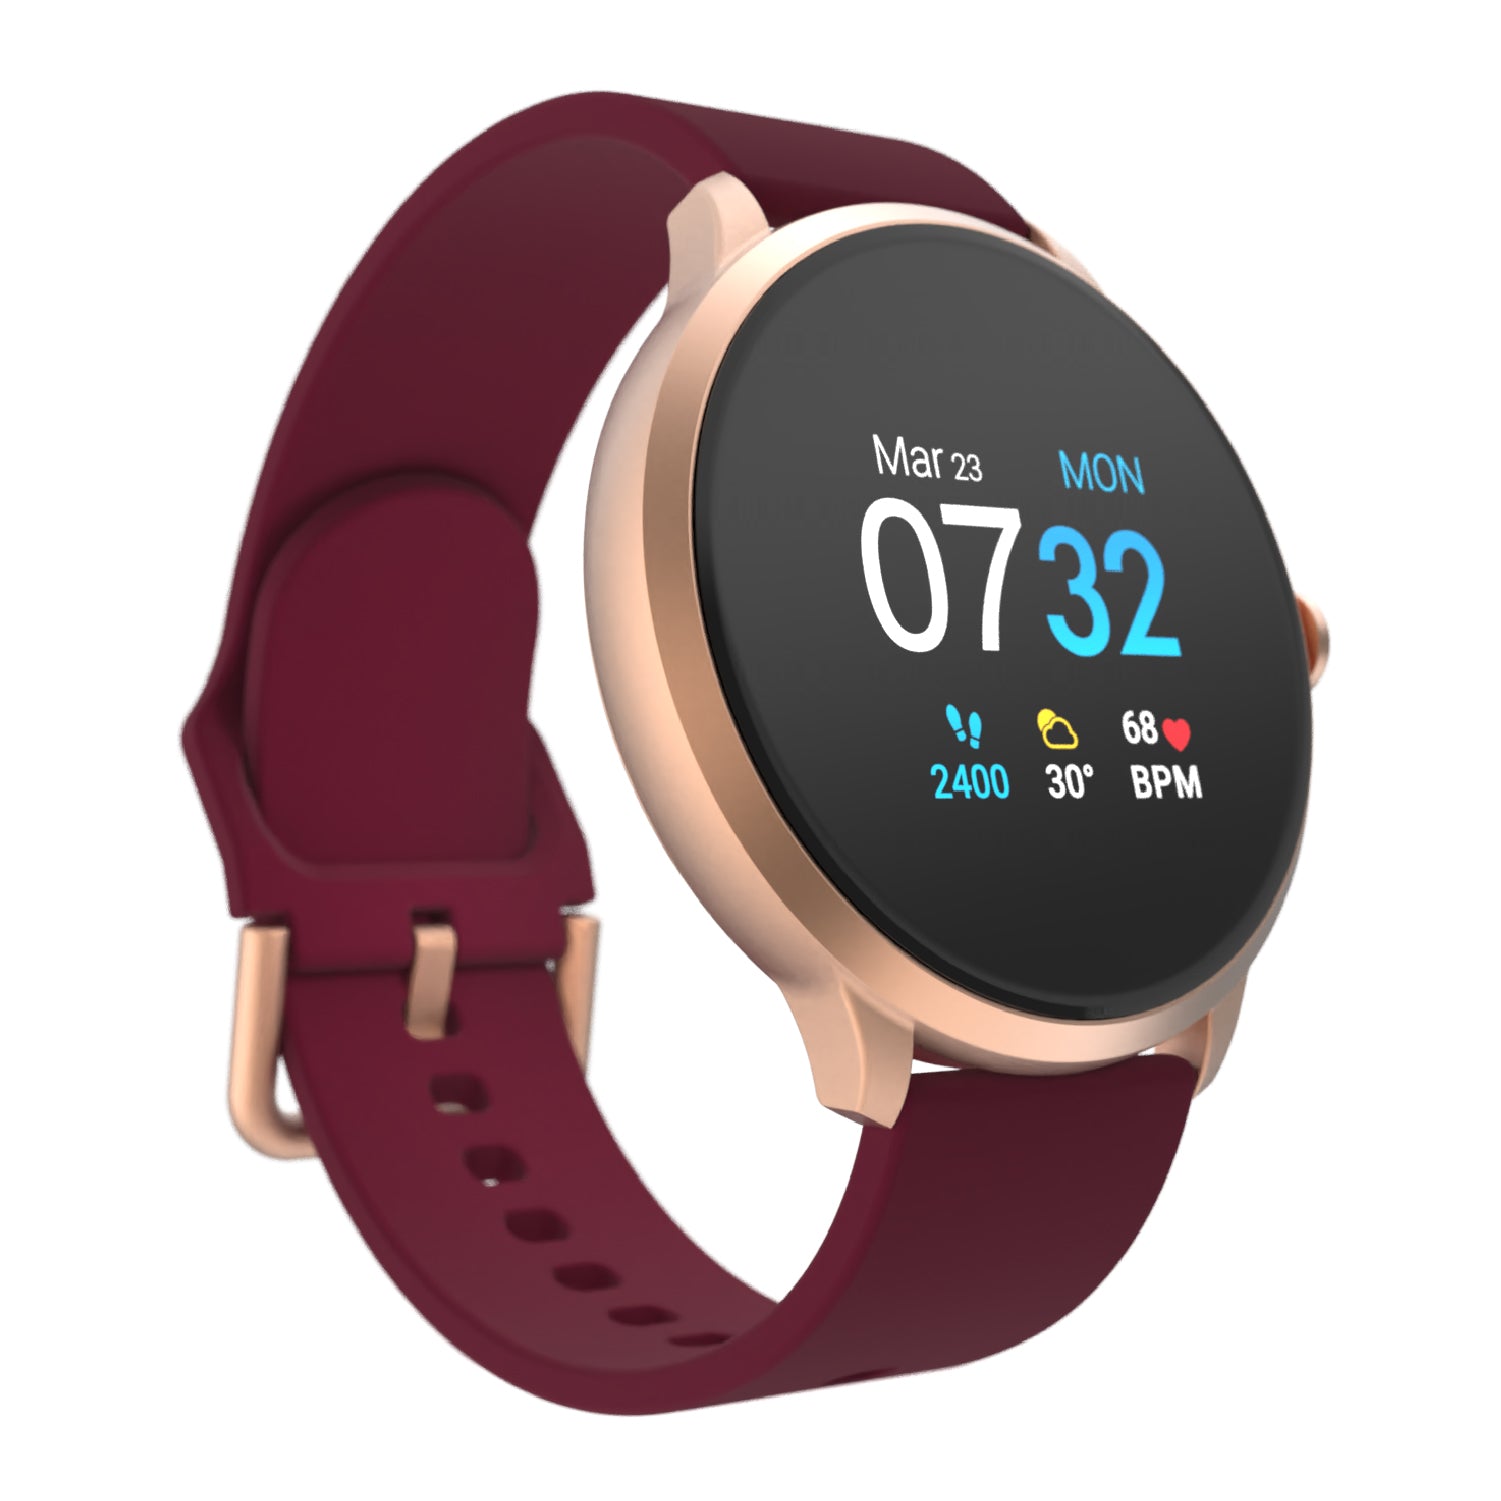 iTouch Sport 3 Smartwatch in Rose Gold with Merlot Strap